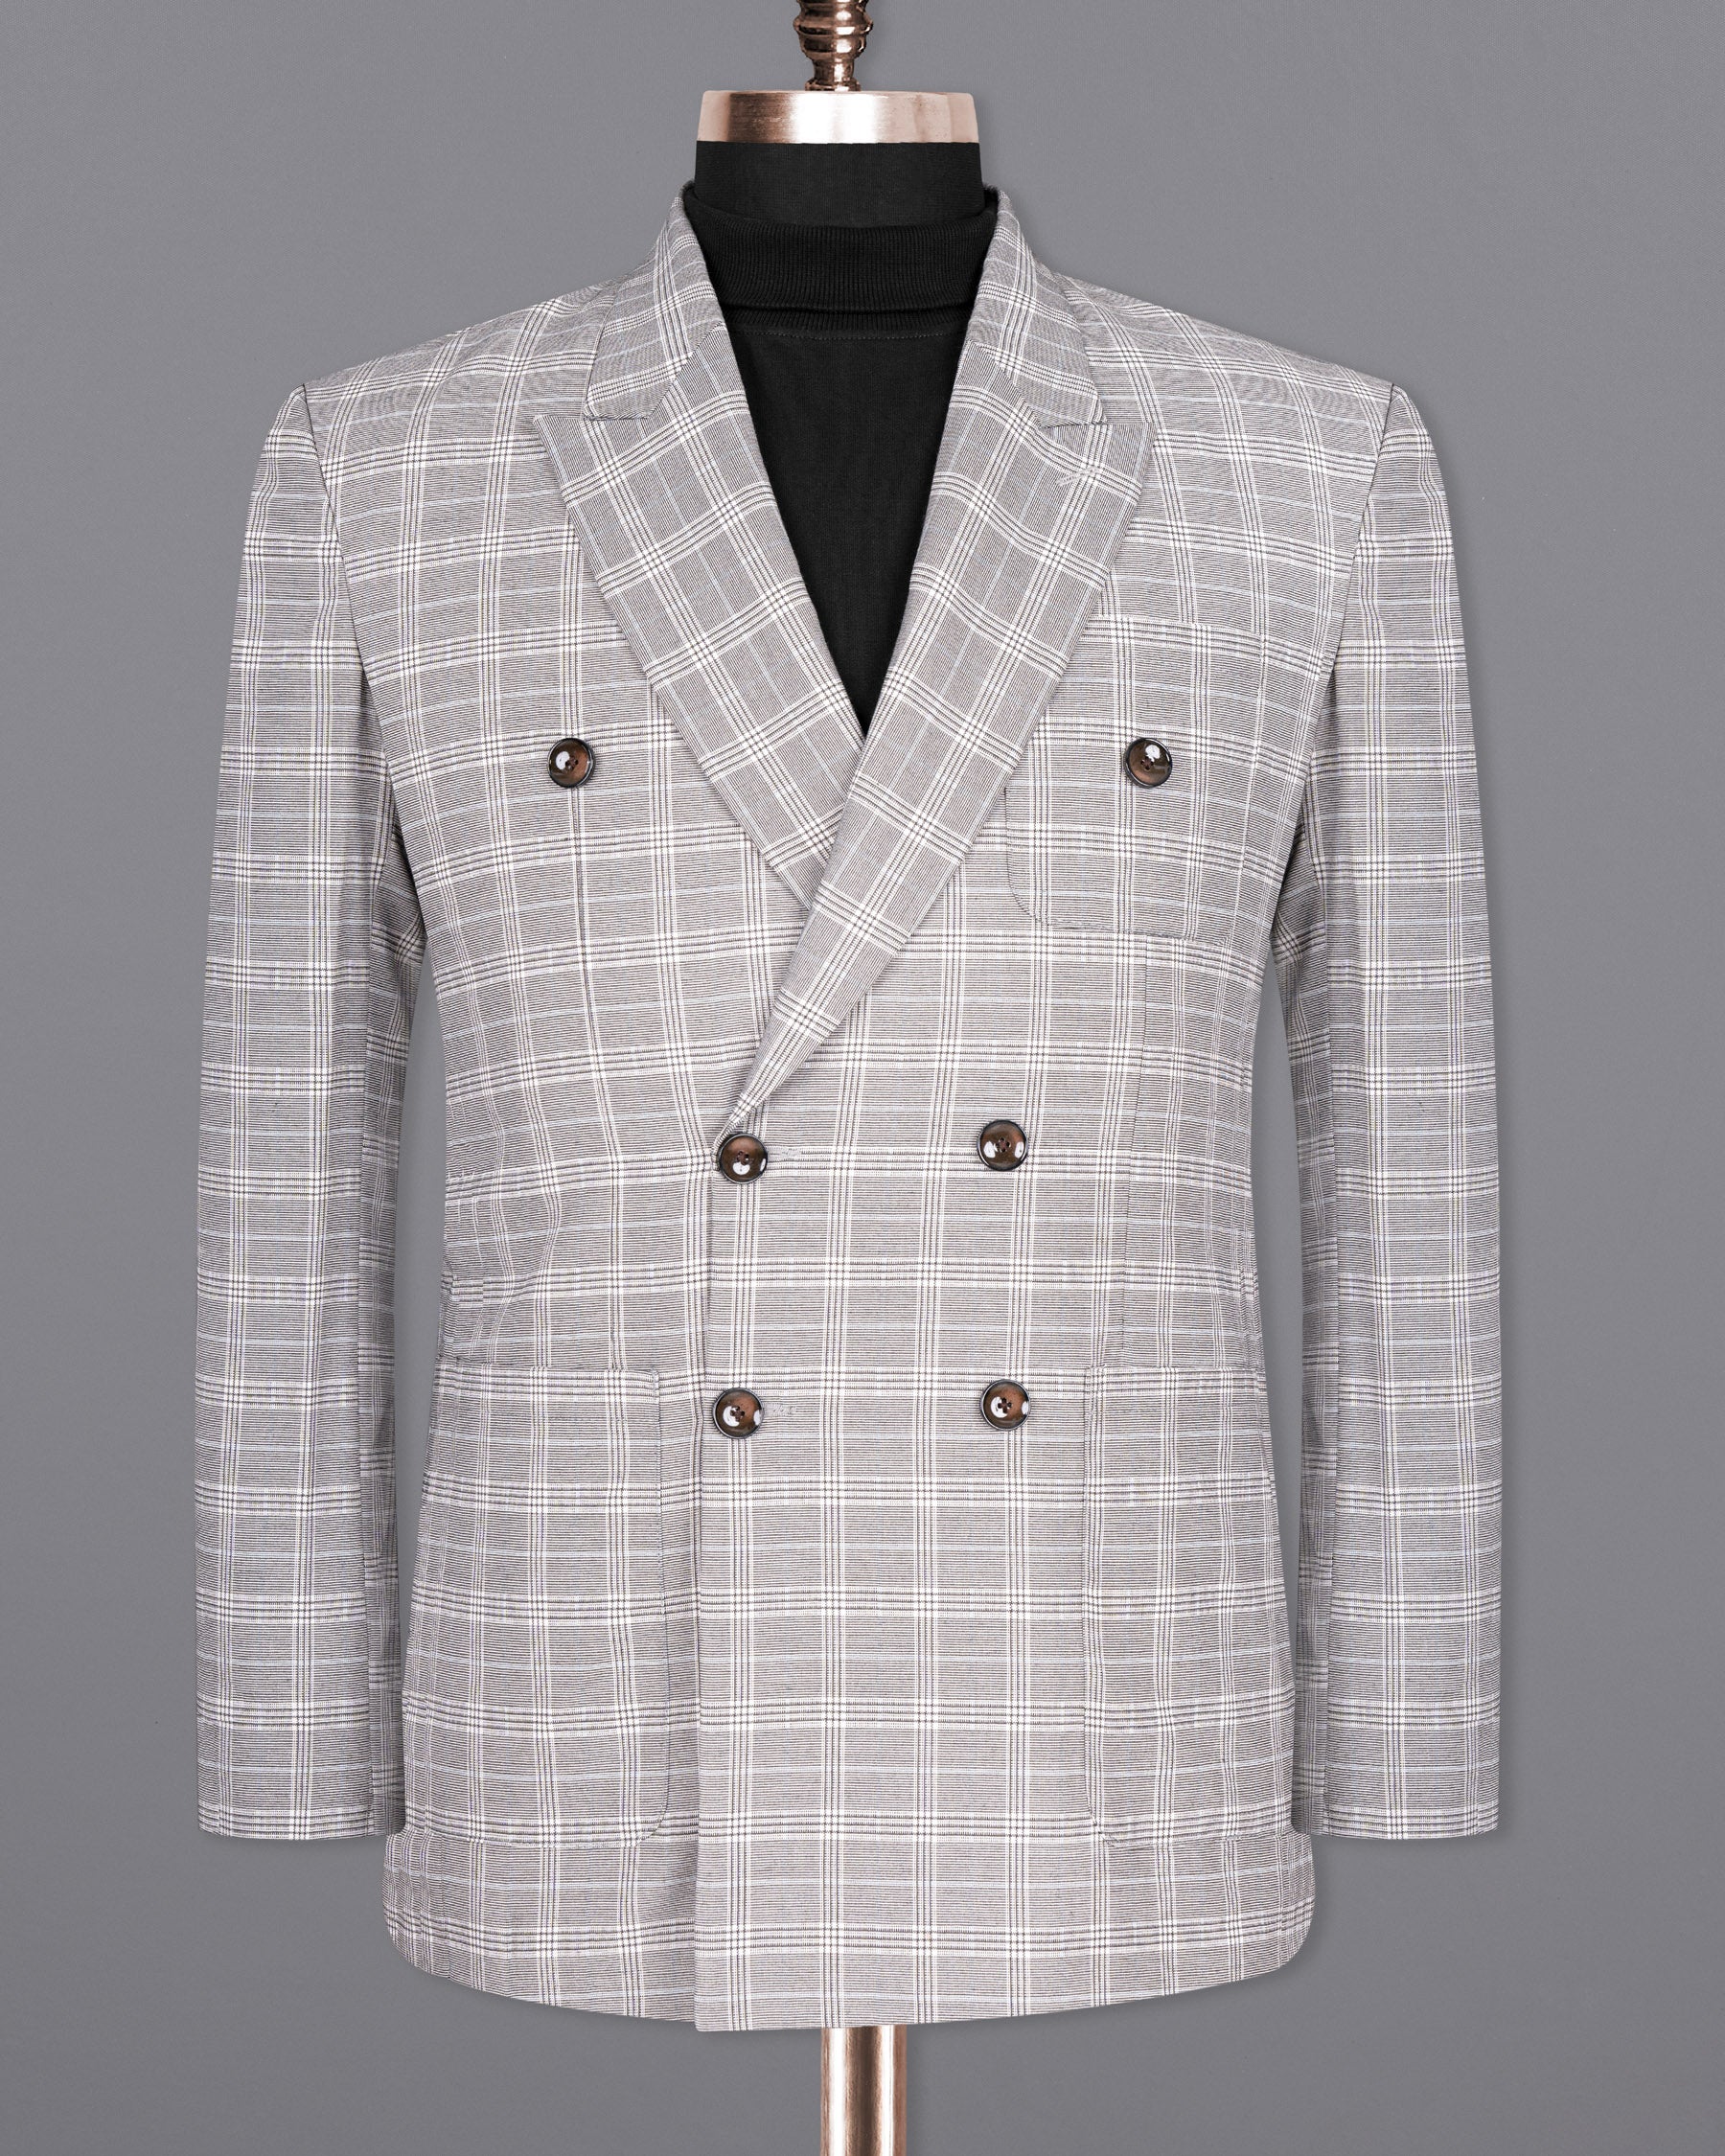 Mercury Grey Plaid Woolrich Double-Breasted Blazer BL1478-D22-36,BL1478-DB-PP-38,BL1478-DB-PP-40,BL1478-DB-PP-42,BL1478-DB-PP-44,BL1478-DB-PP-46,BL1478-DB-PP-48,BL1478-DB-PP-50,BL1478-DB-PP-52,BL1478-DB-PP-54,BL1478-DB-PP-56,BL1478-DB-PP-58,BL1478-DB-PP-60.